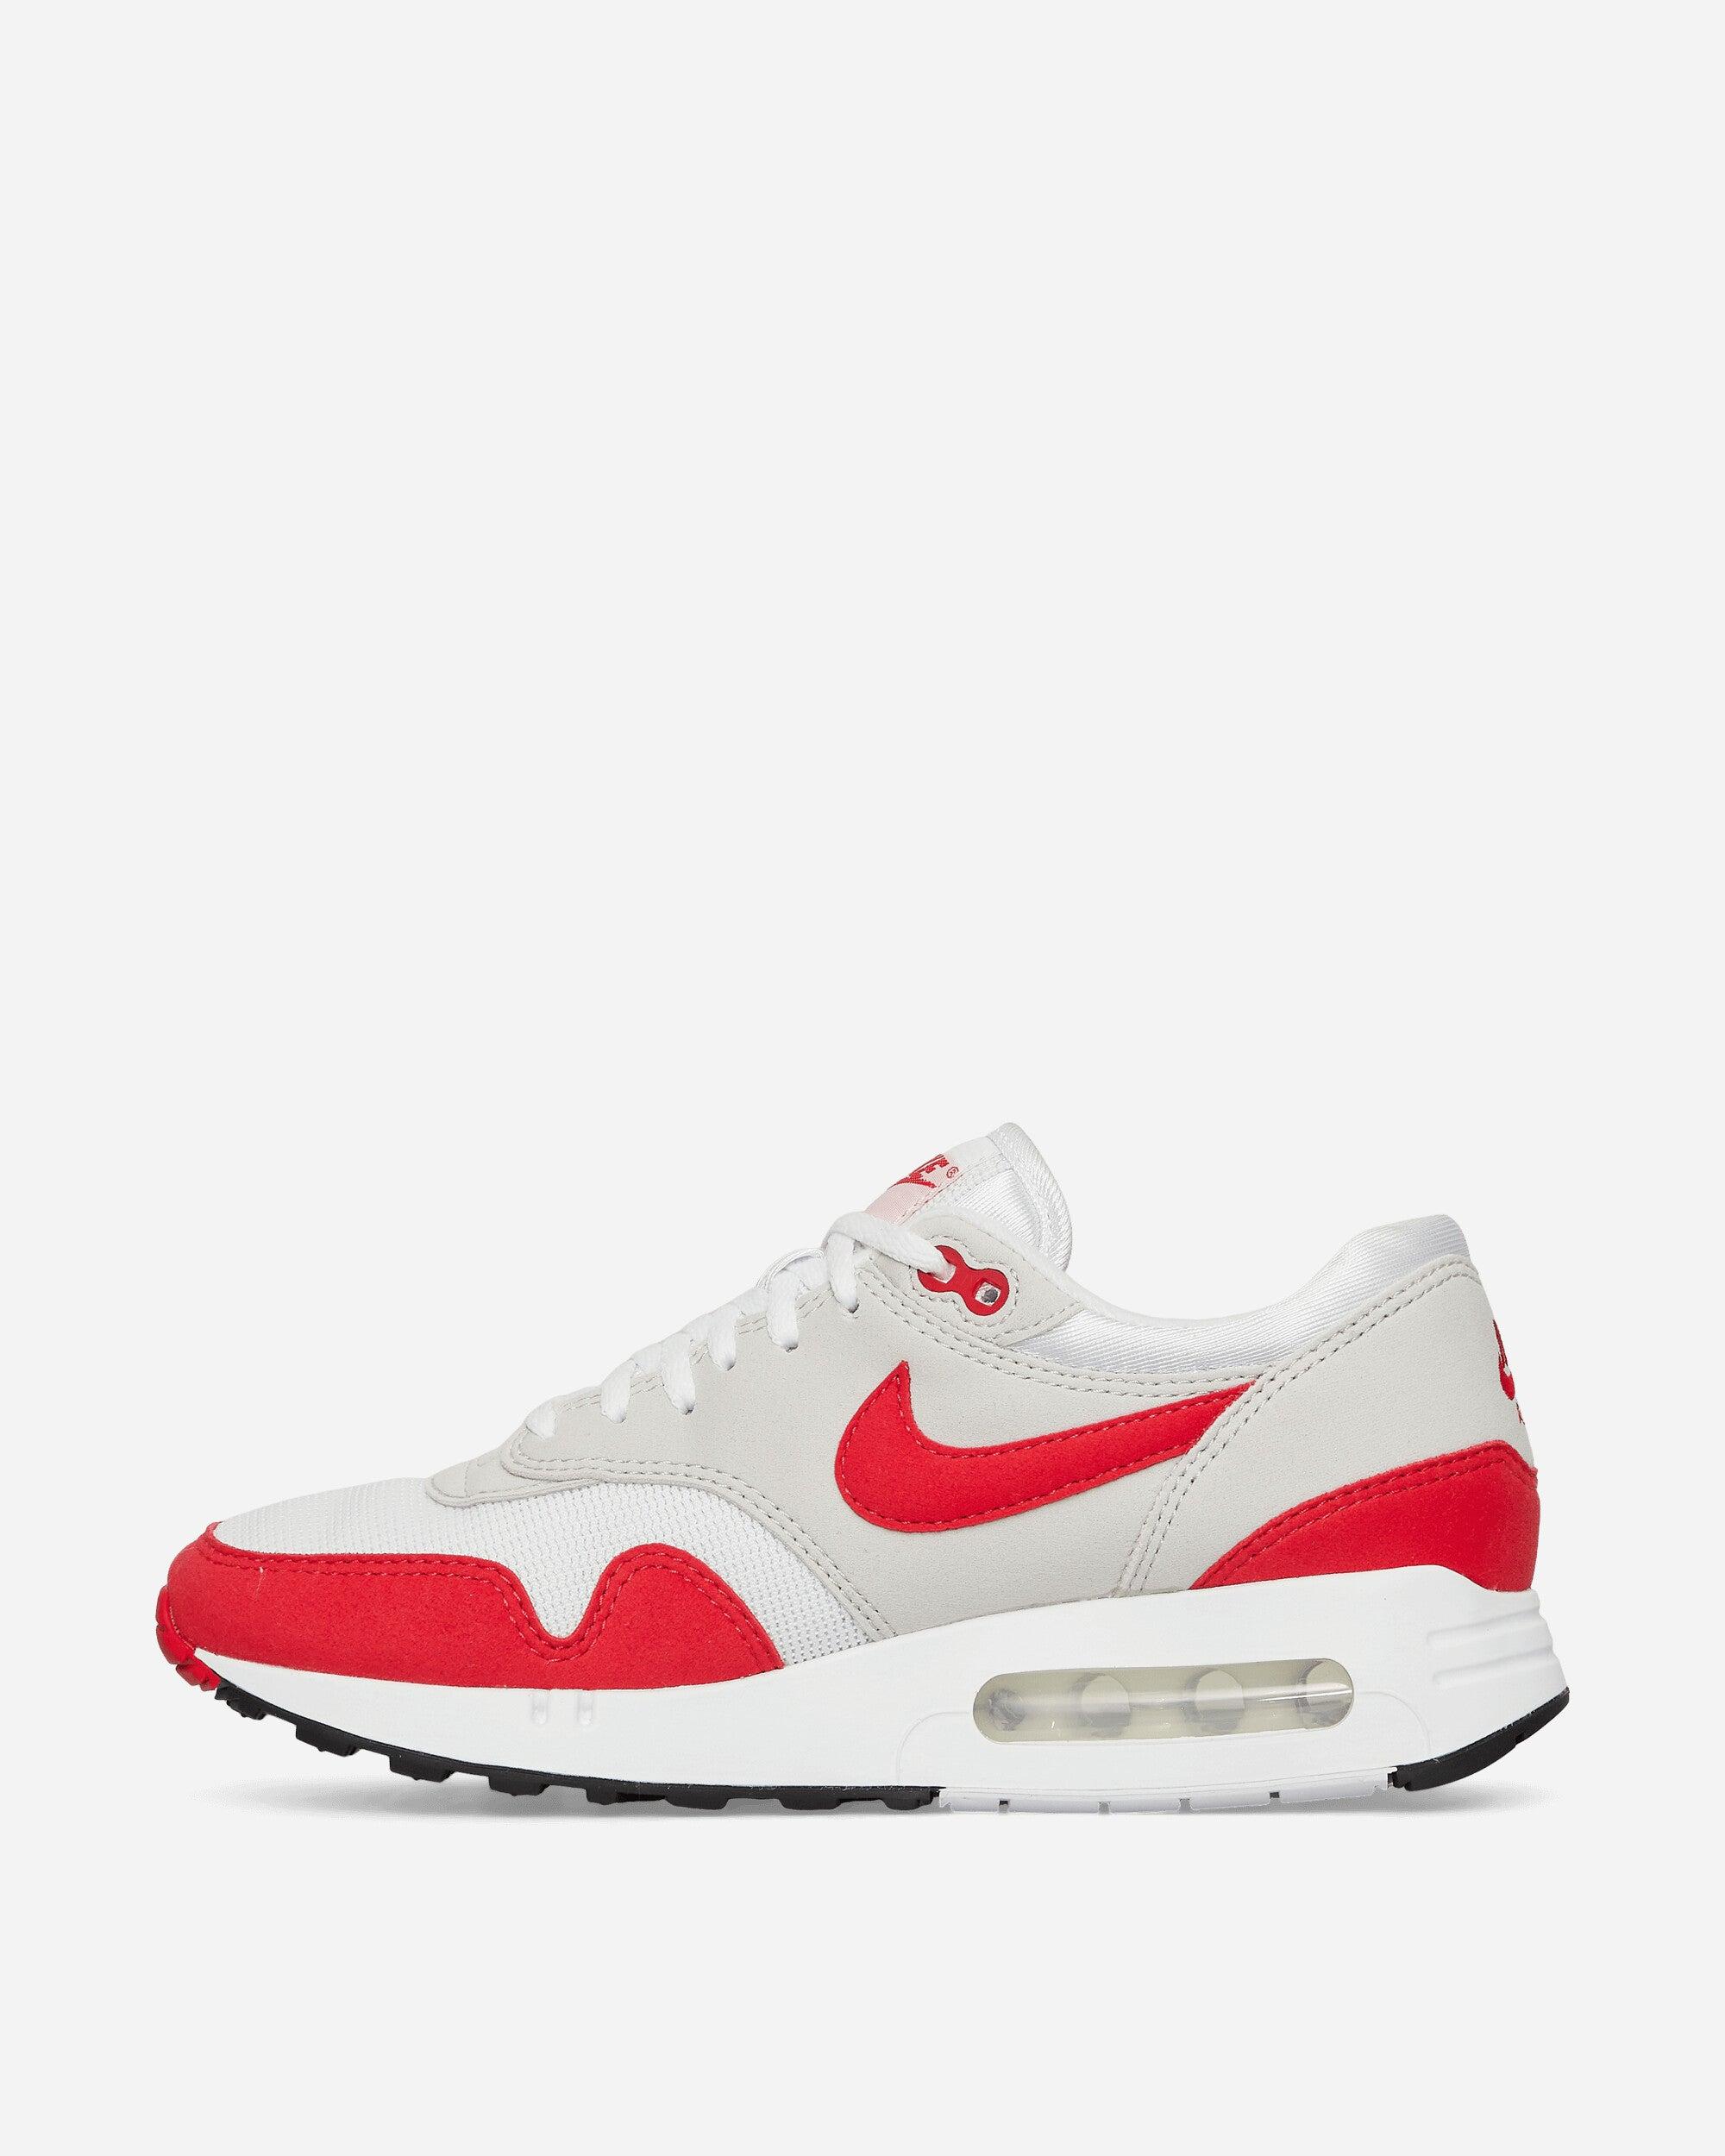 Nike Air Max 1 86 Og Big Bubble Sneakers White / University Red | Lyst